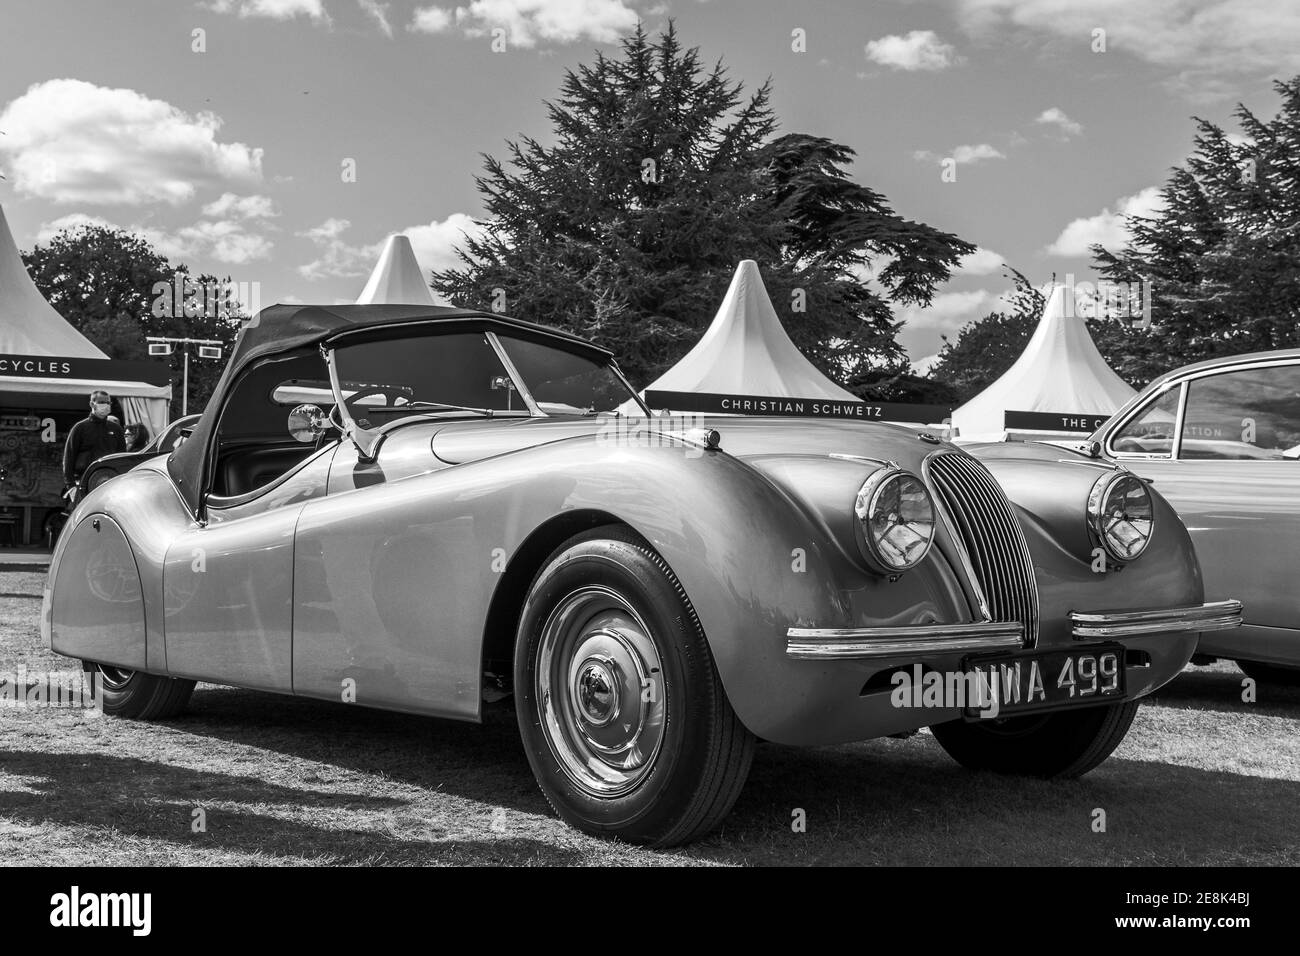 1950 Jaguar XK120 Drophead Coupe on show at the Concours d’Elégance held at Blenheim Palace on the 26 September 2020 Stock Photo